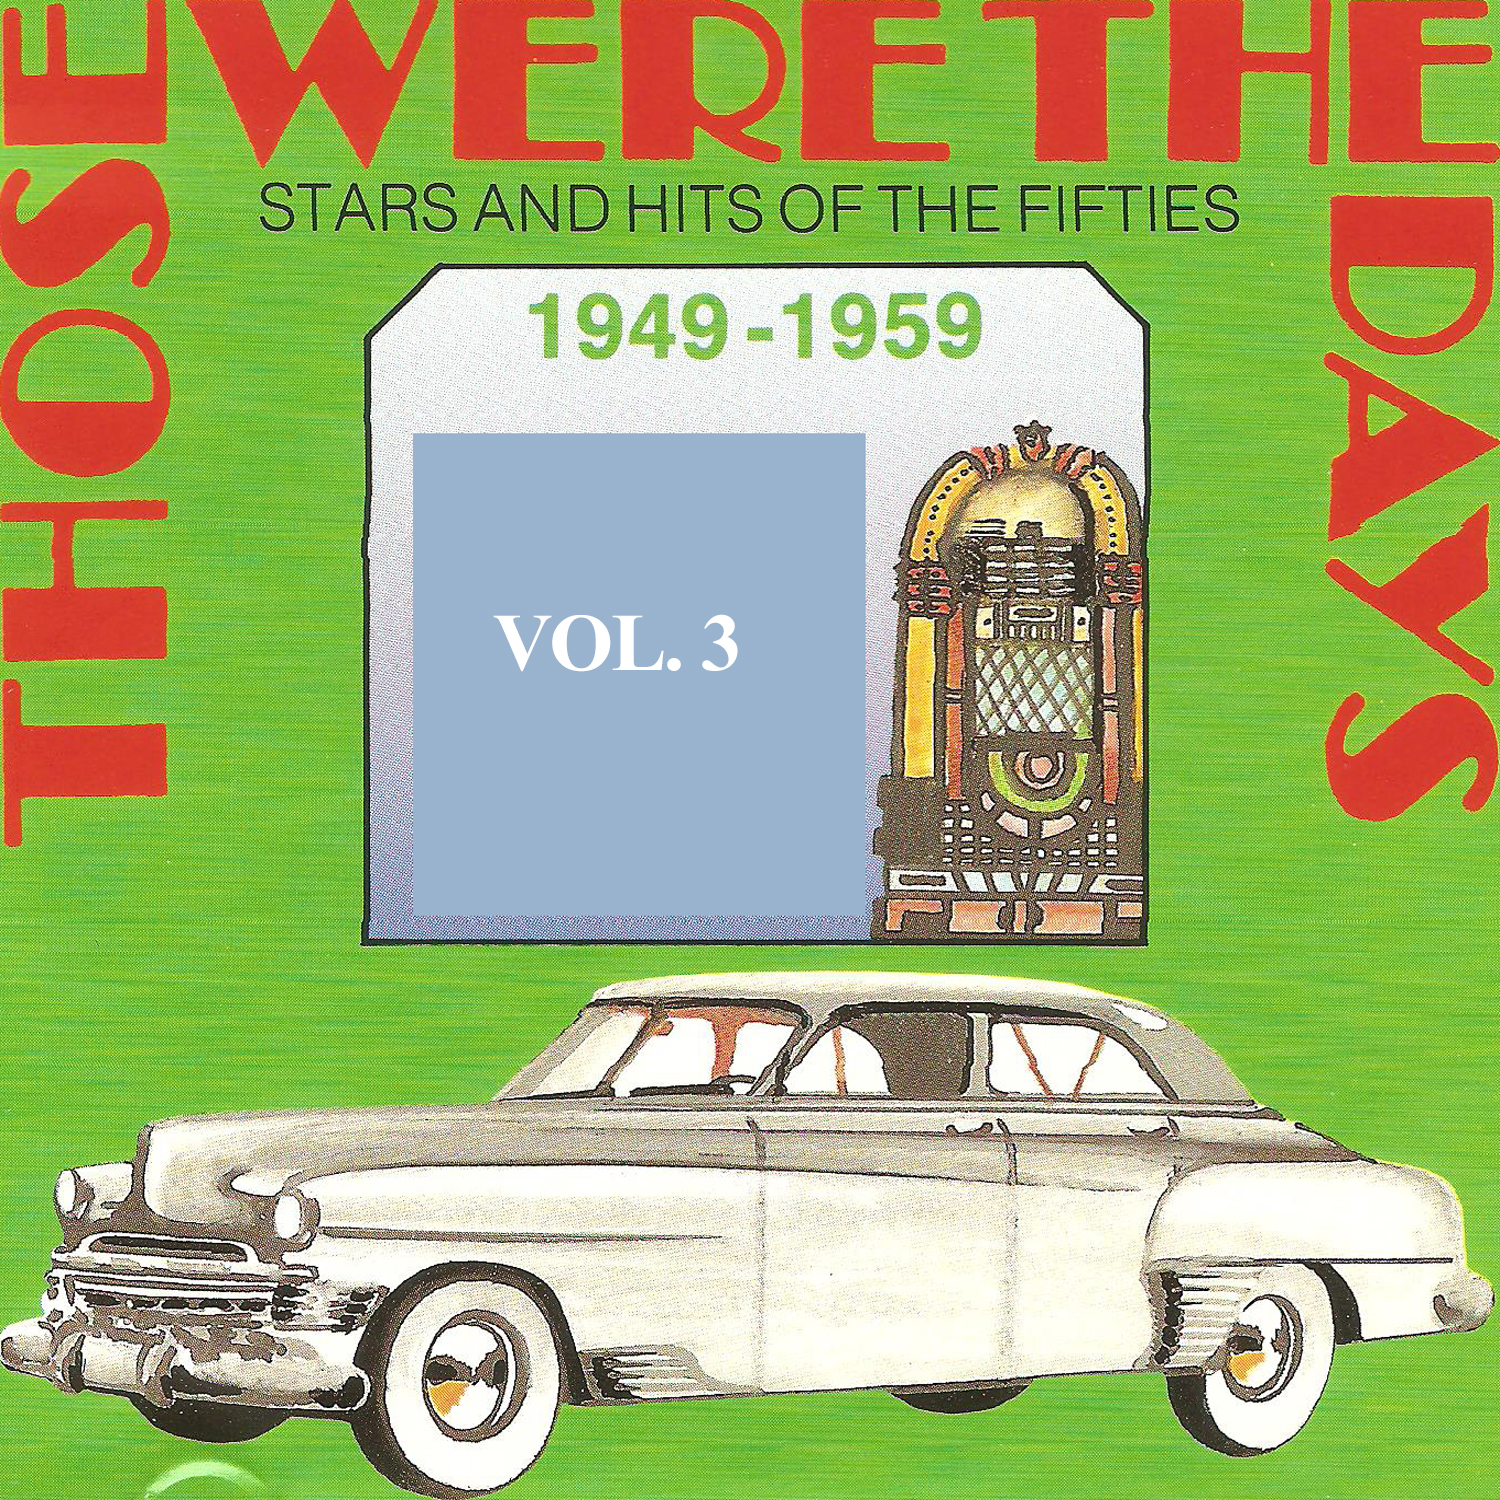 Stars and Hits of the Fifties (1949 - 1959), Vol. 3